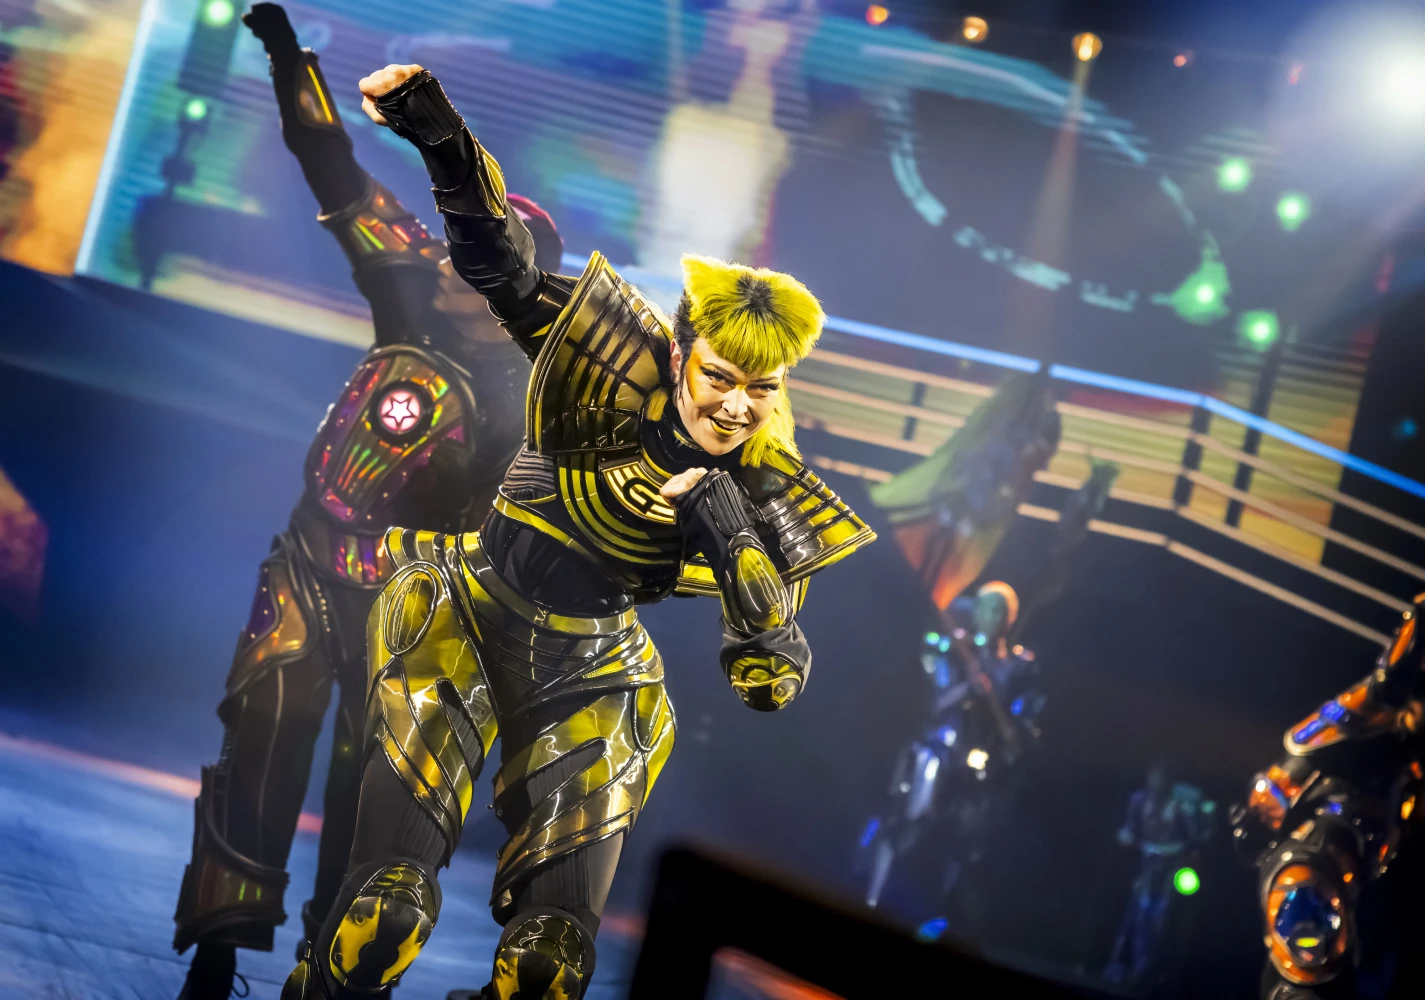 Starlight Express: What to expect - 2